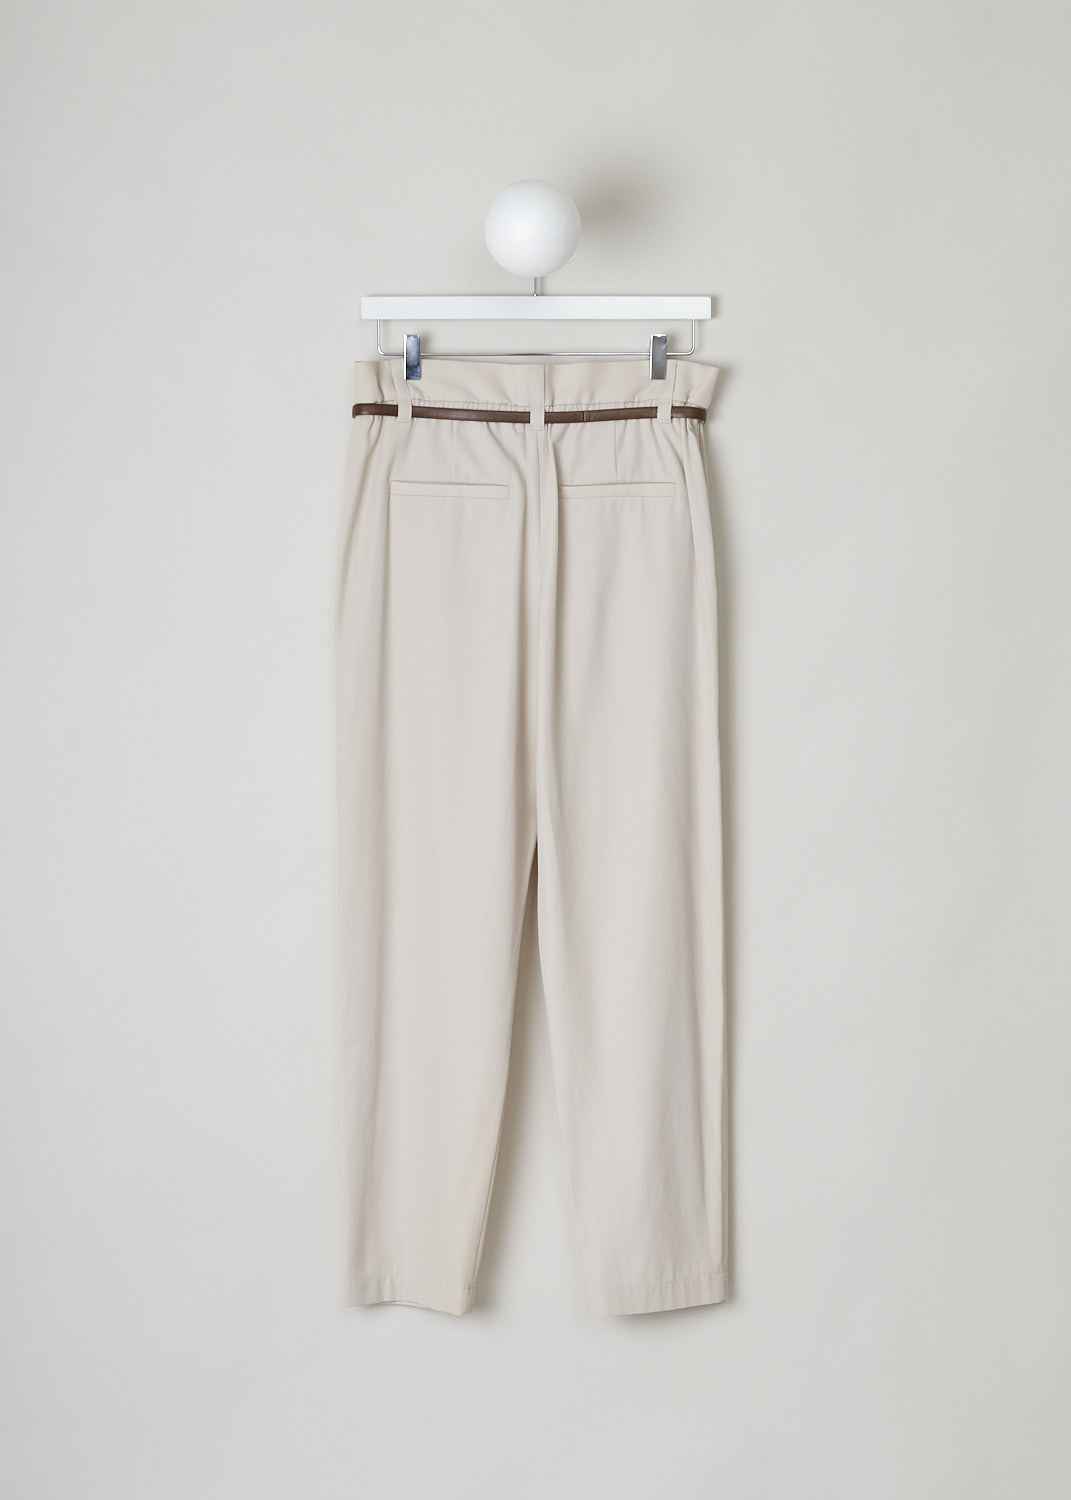 BRUNELLO CUCINELLI, BEIGE PANTS WITH TAPERED LEGS, MA033P7379_C8501, Beige, Back, These beige pleated pants have a half elasticated waistband. The waistband has both broad and a narrow belt loops and comes with a brown leather belt through the narrow belt loops. A concealed snap button and zipper function as the closure option. These pants have a pleated front with tapered pant legs. Slanted pockets can be found in the front and welt pockets in the back.  
